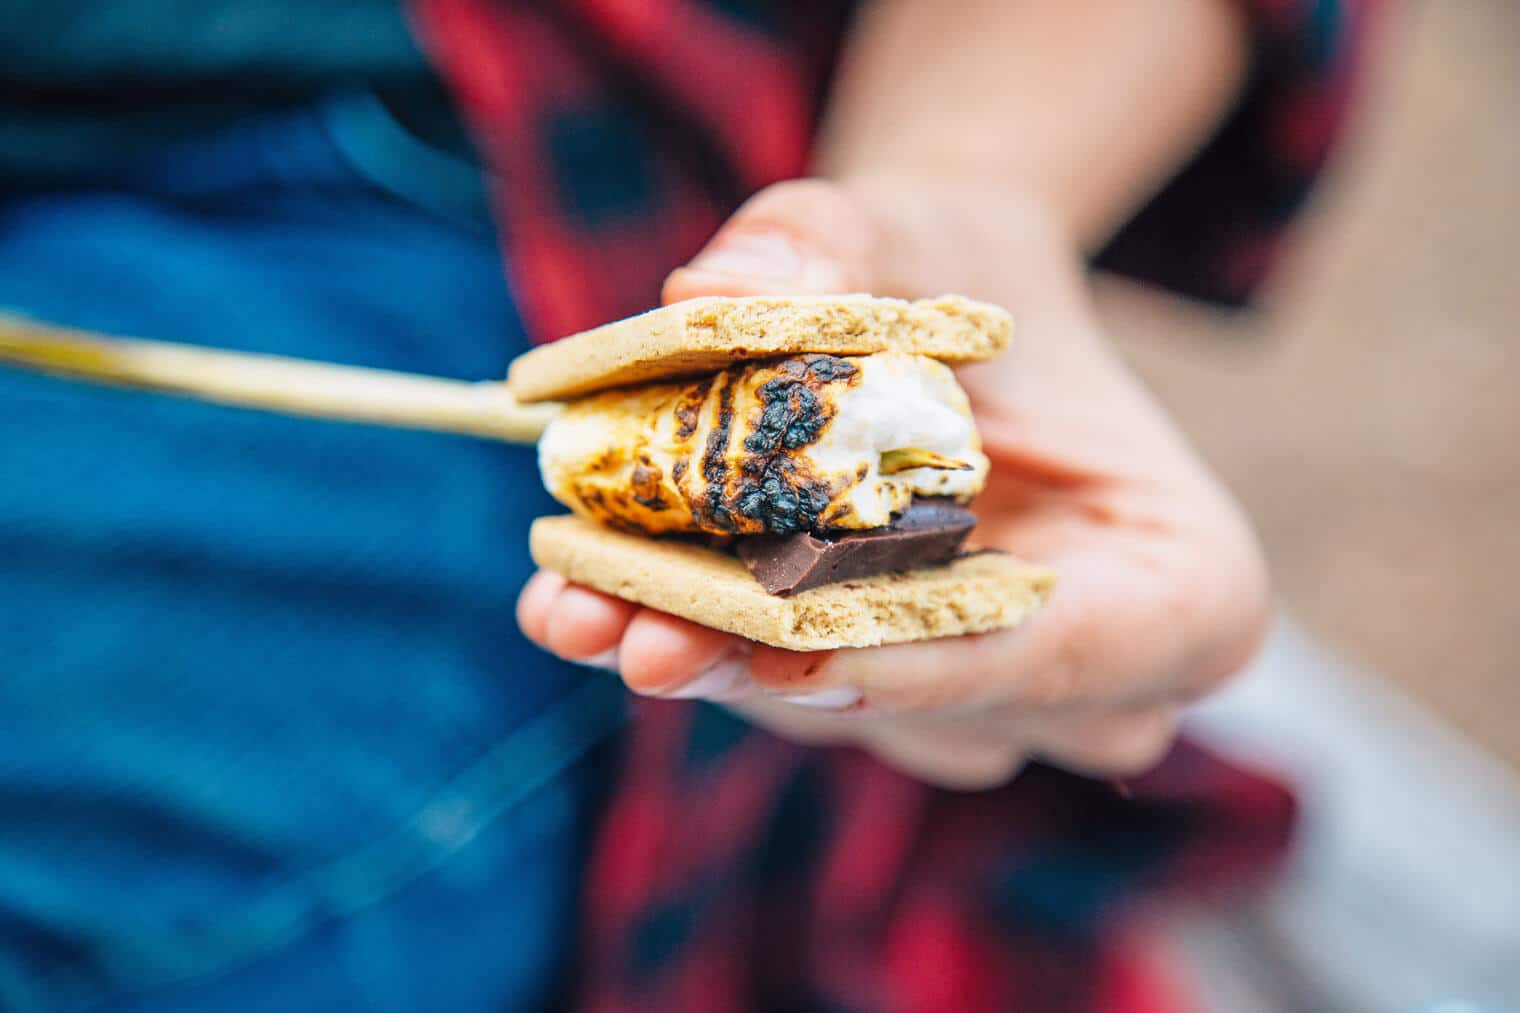 You got: S'mores! 🍰 Eat Desserts, Desserts, And More Desserts to Find Out What Summer Food You Embody 😎